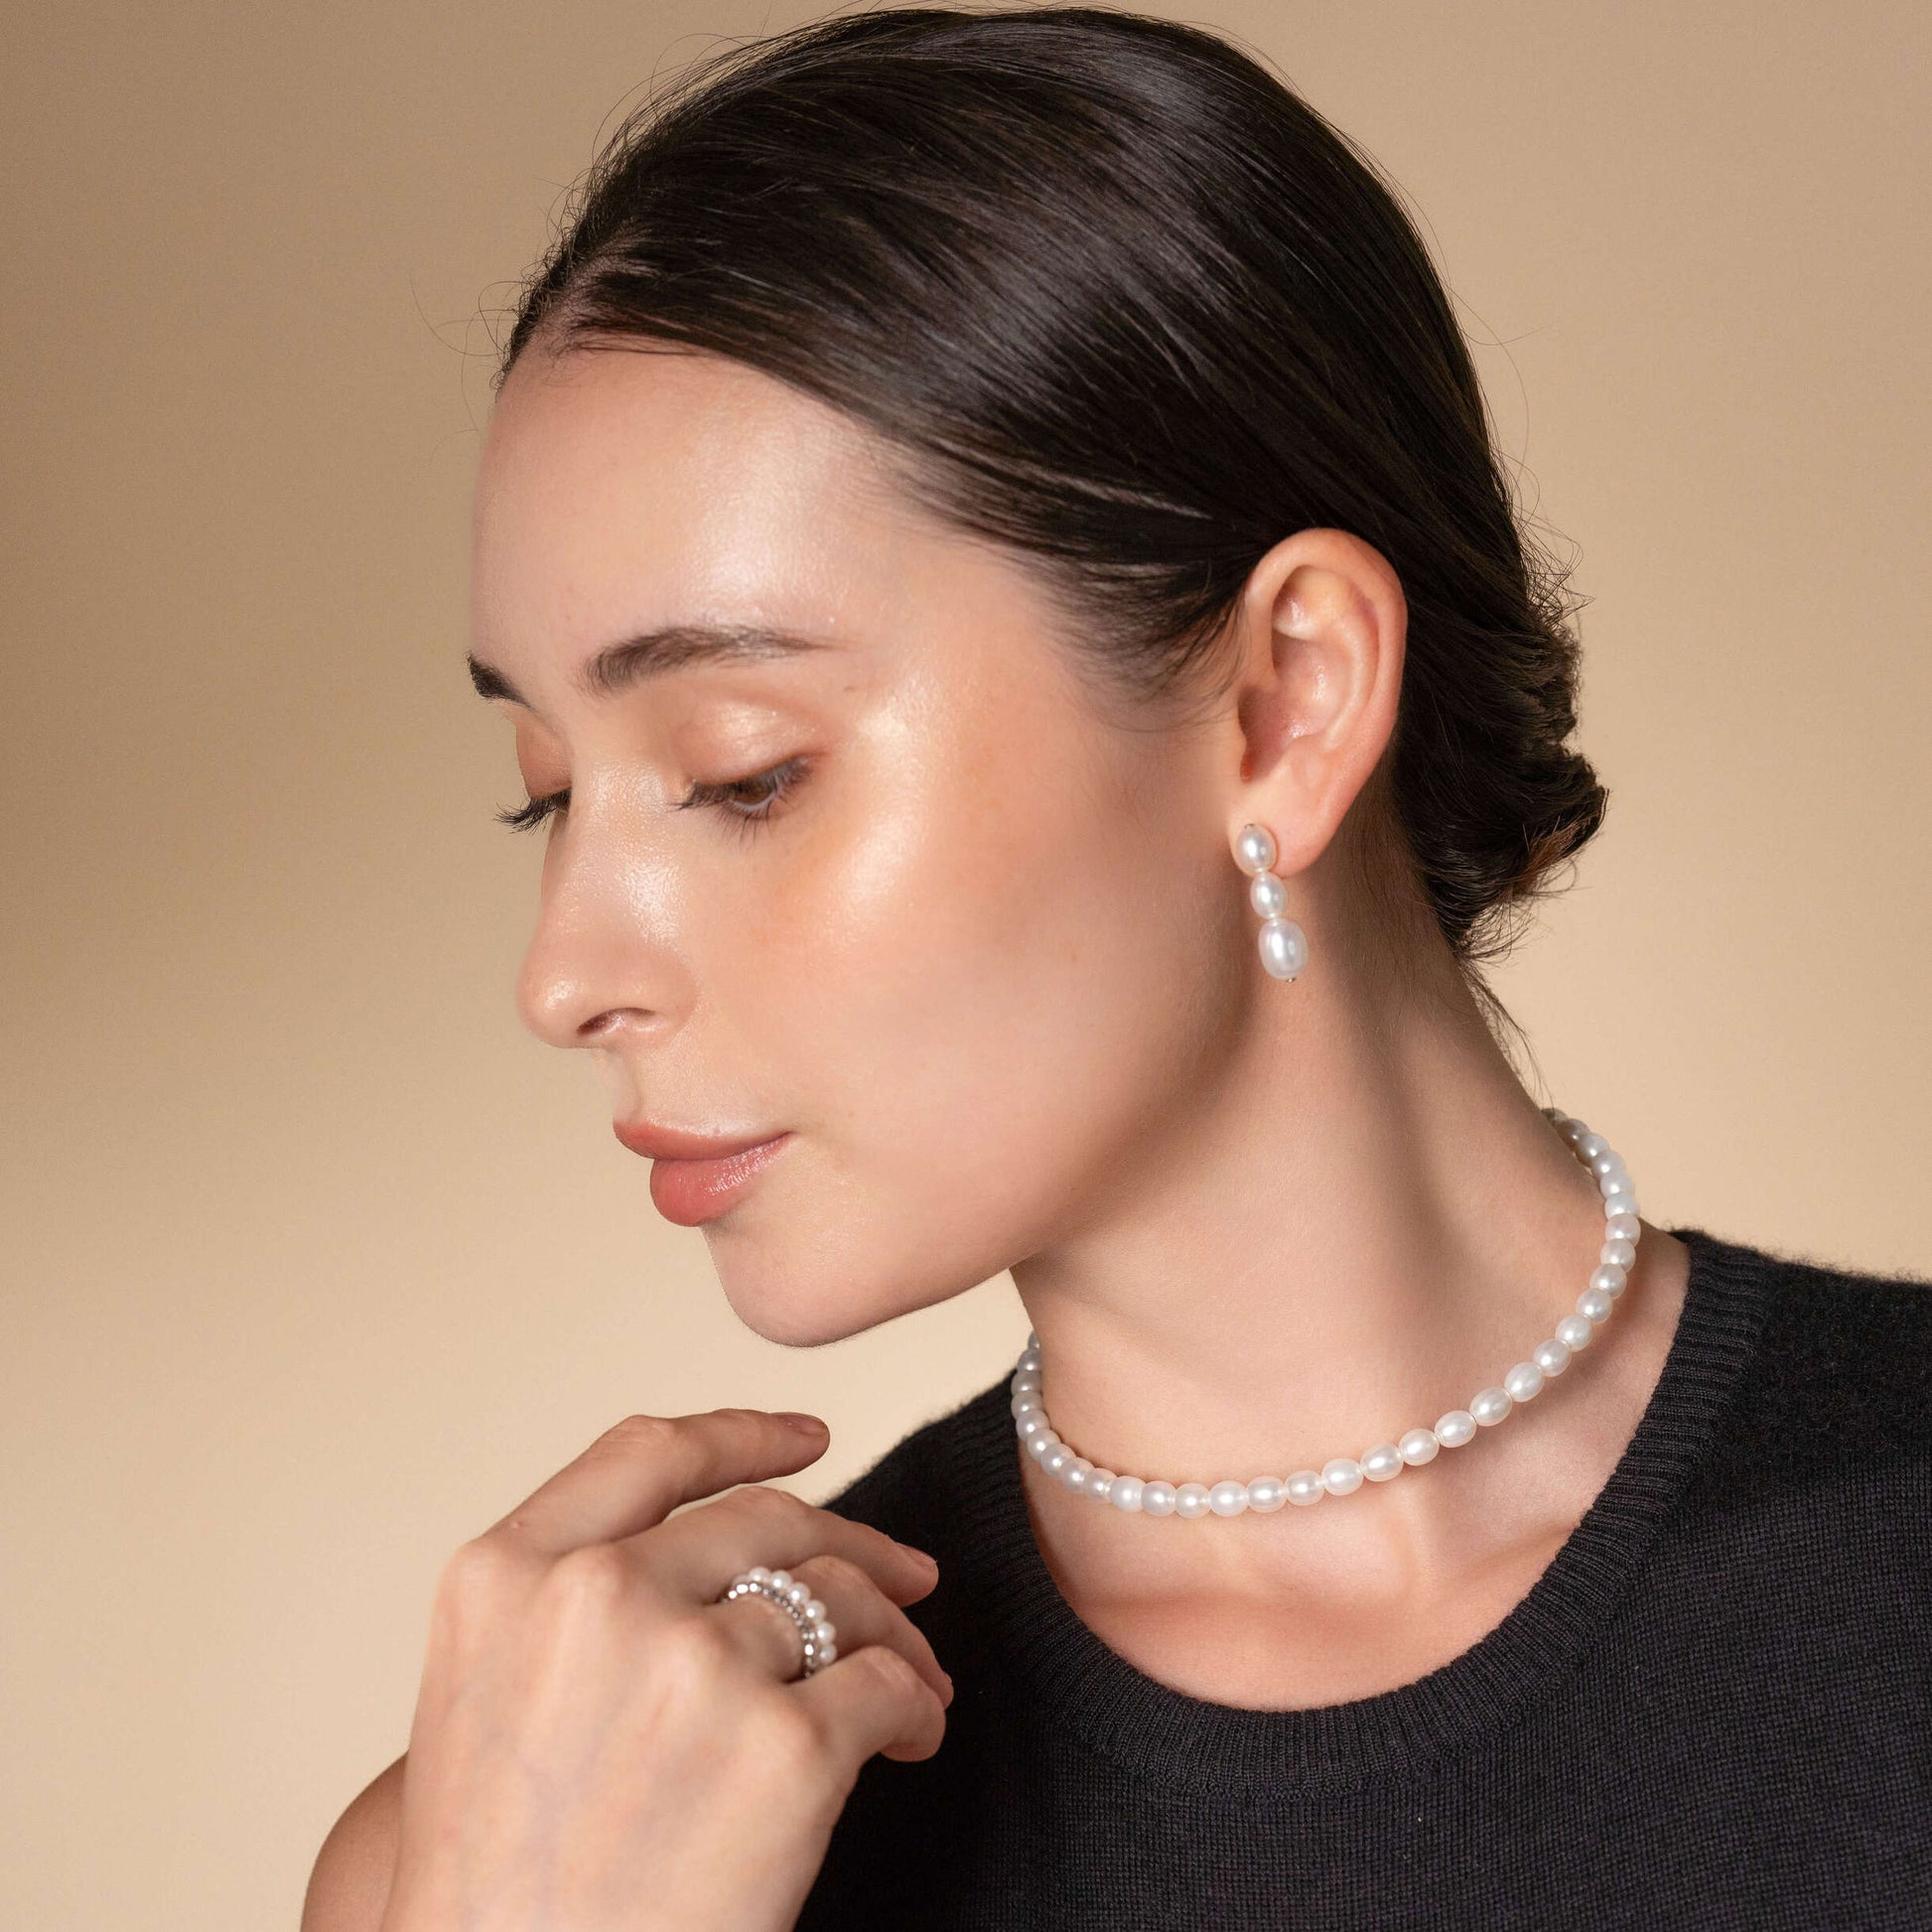 Enhance your elegance with a woman in a pearl necklace and earrings. Perfect for any occasion!